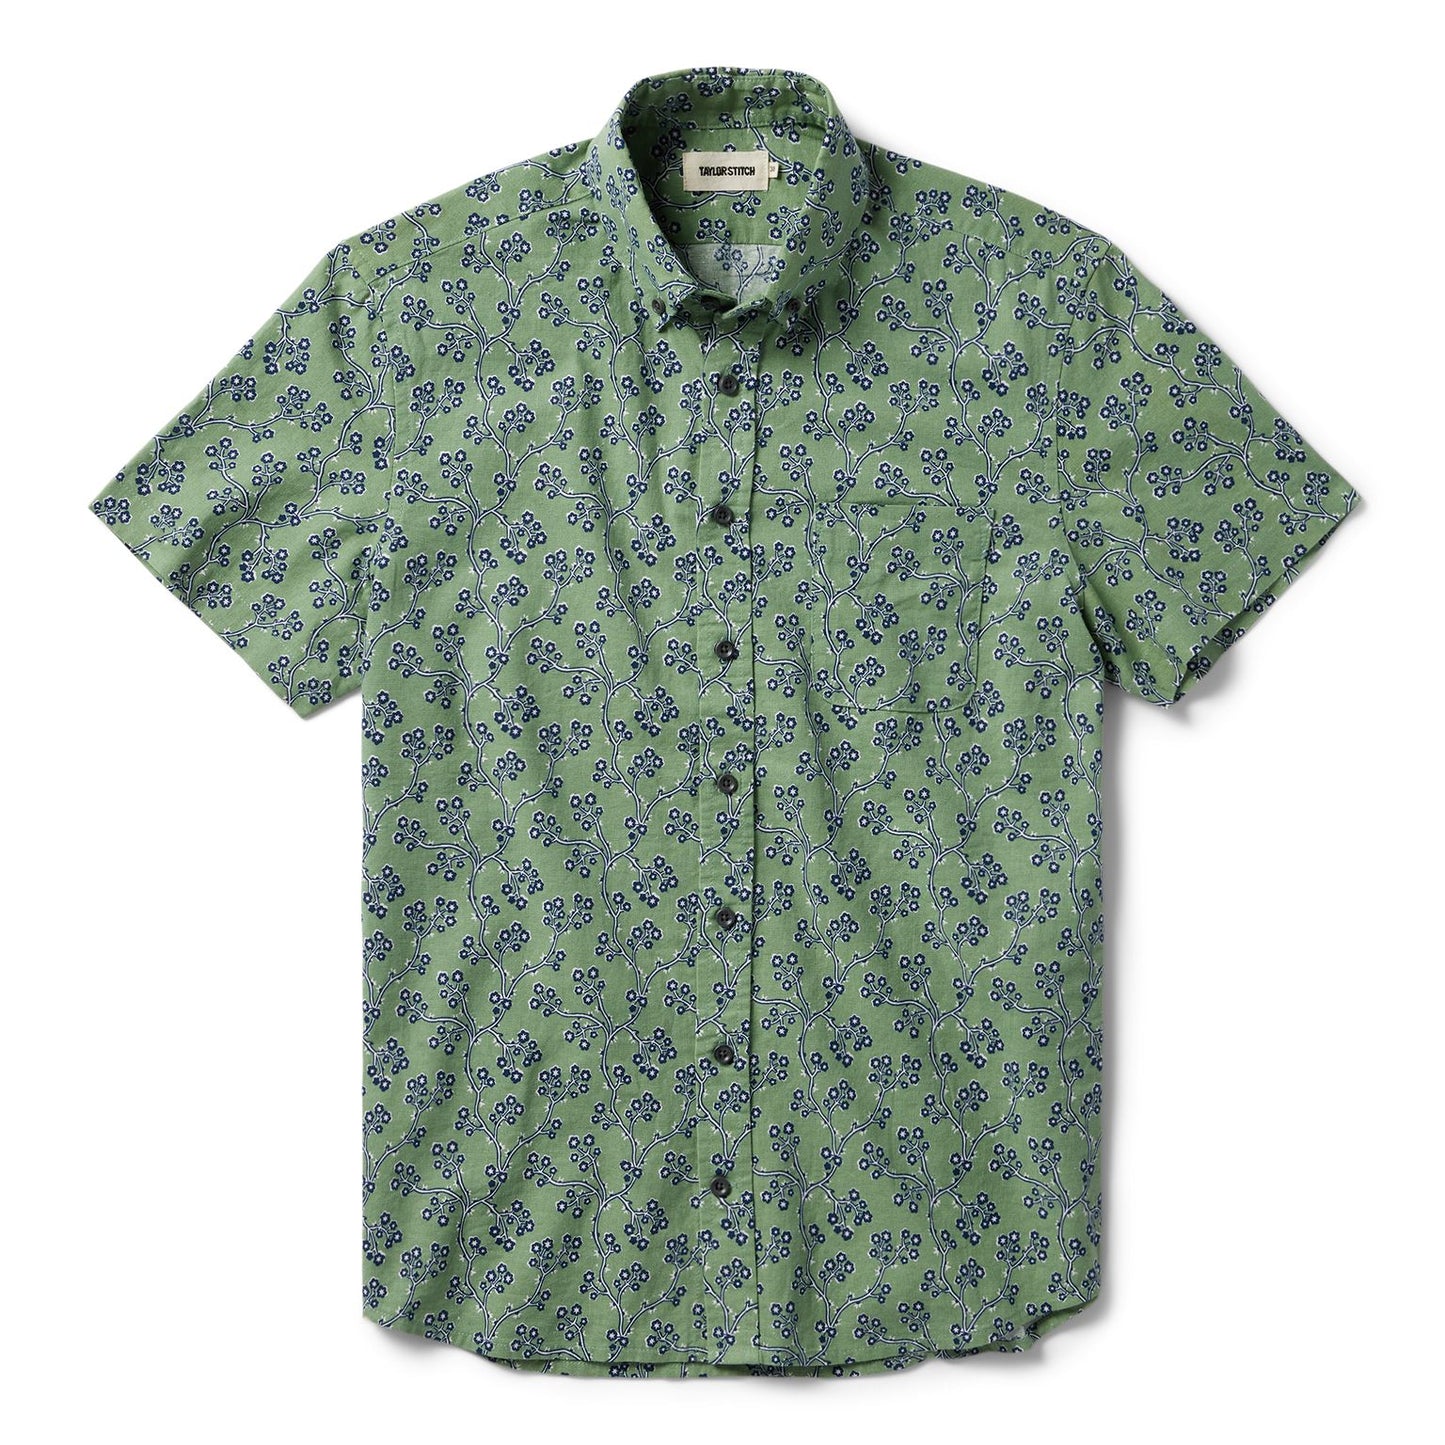 The Short Sleeve Jack in Vintage Cherry Blossom